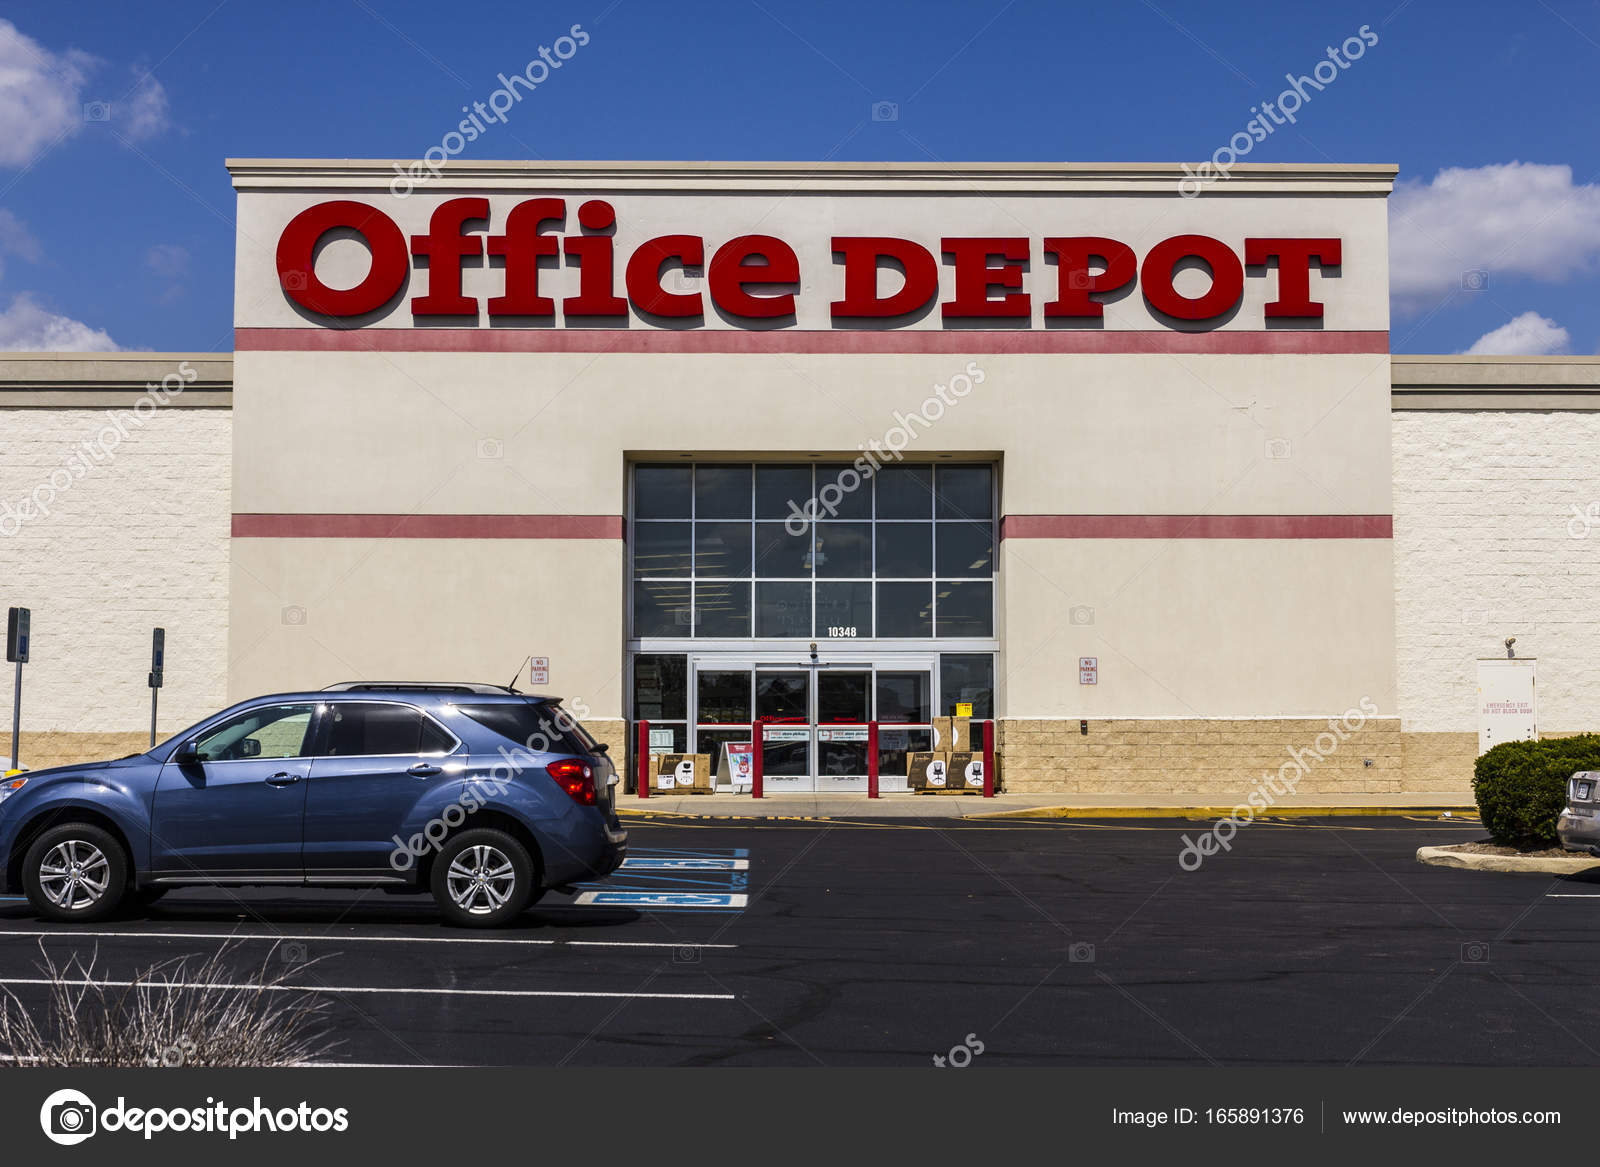 19 Officemax Stock Photos Free Royalty Free Officemax Images Depositphotos